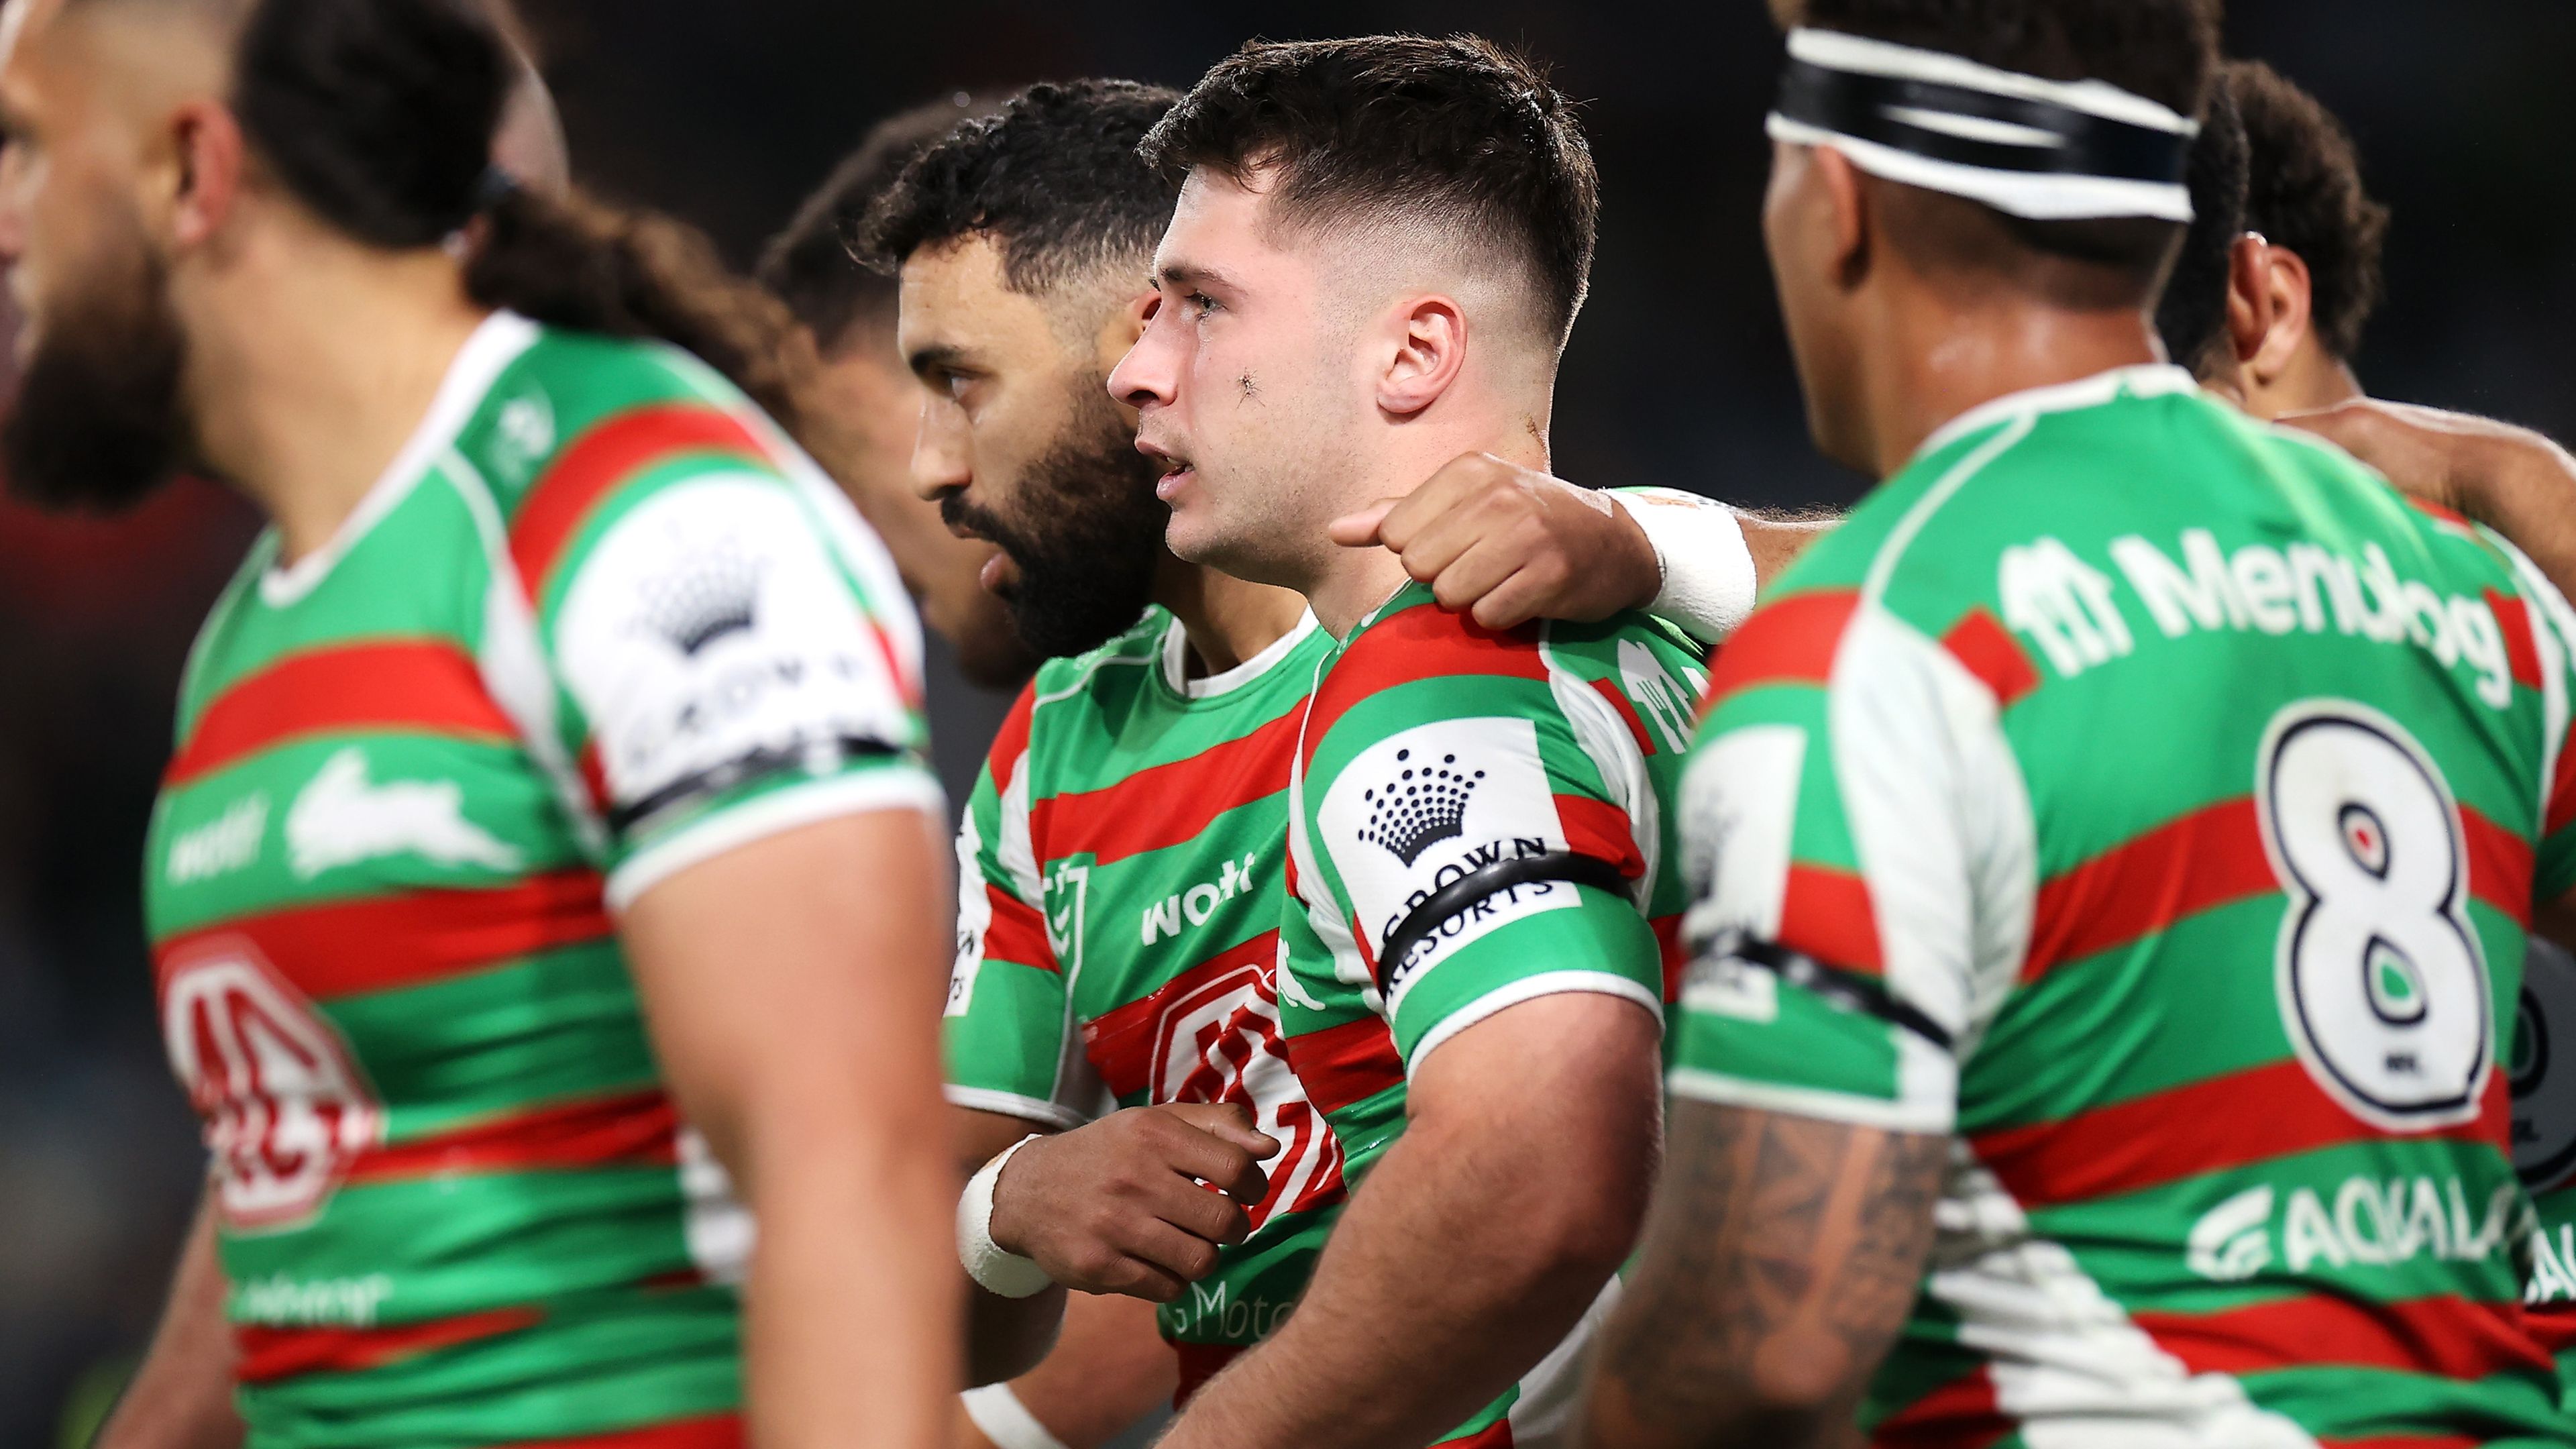 Ivan Cleary's surprise praise for opposing halfback as Panthers, Rabbitohs prepare for final